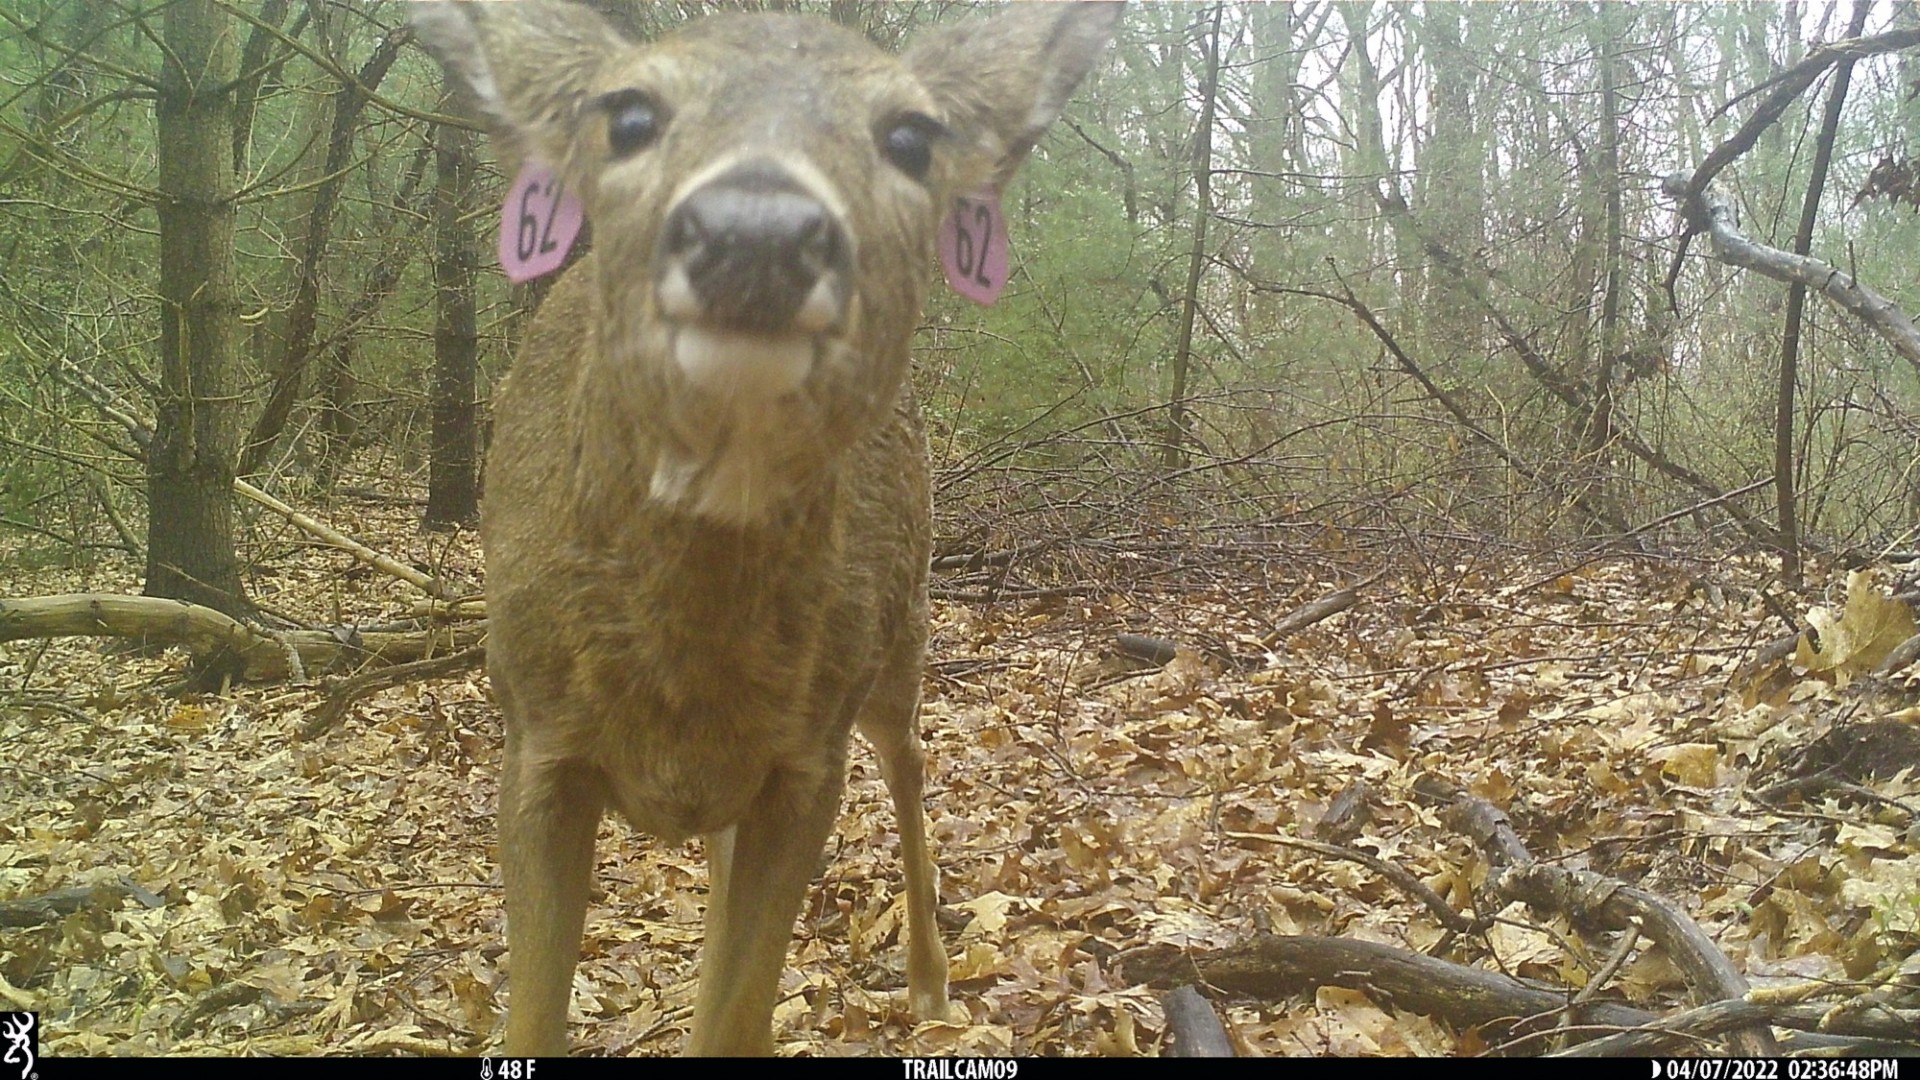 Photo of a deer looking into a trail camera in the woods.